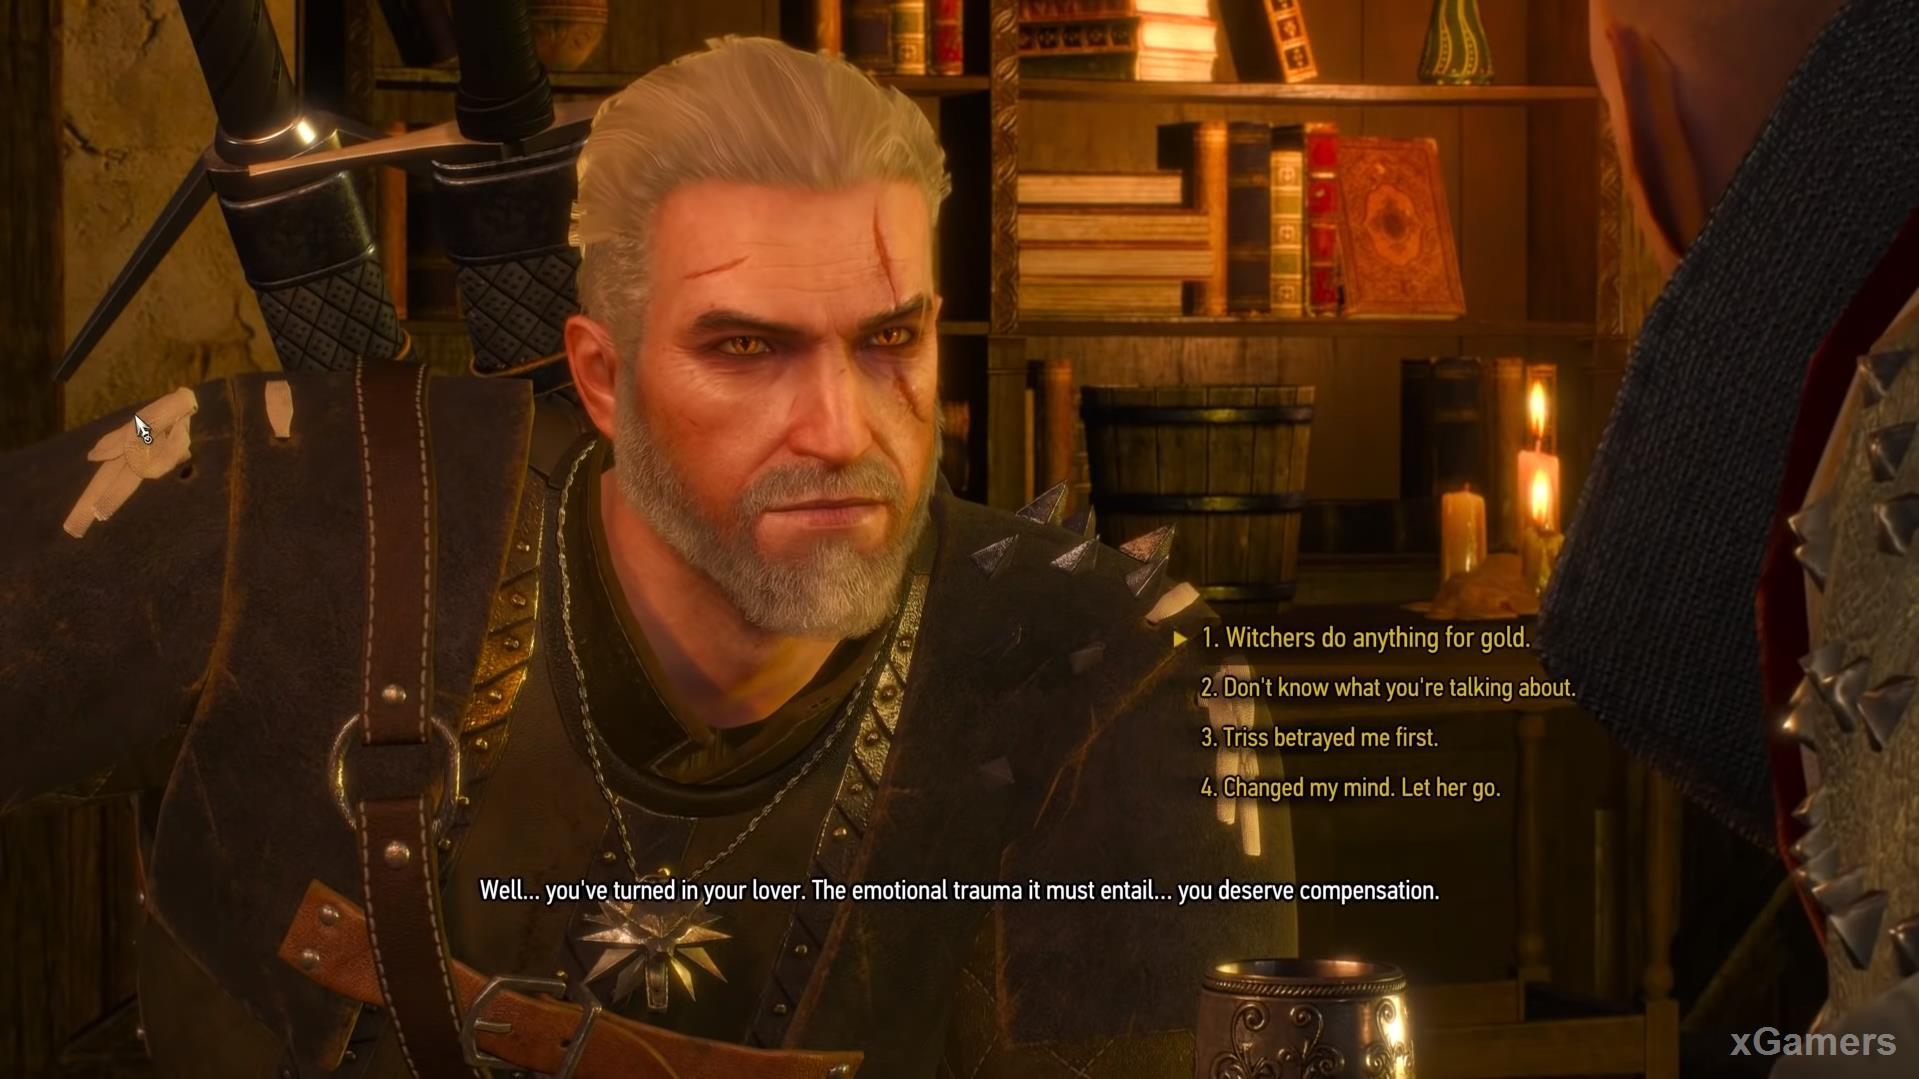 Option 1: Witcher do anything for Gold